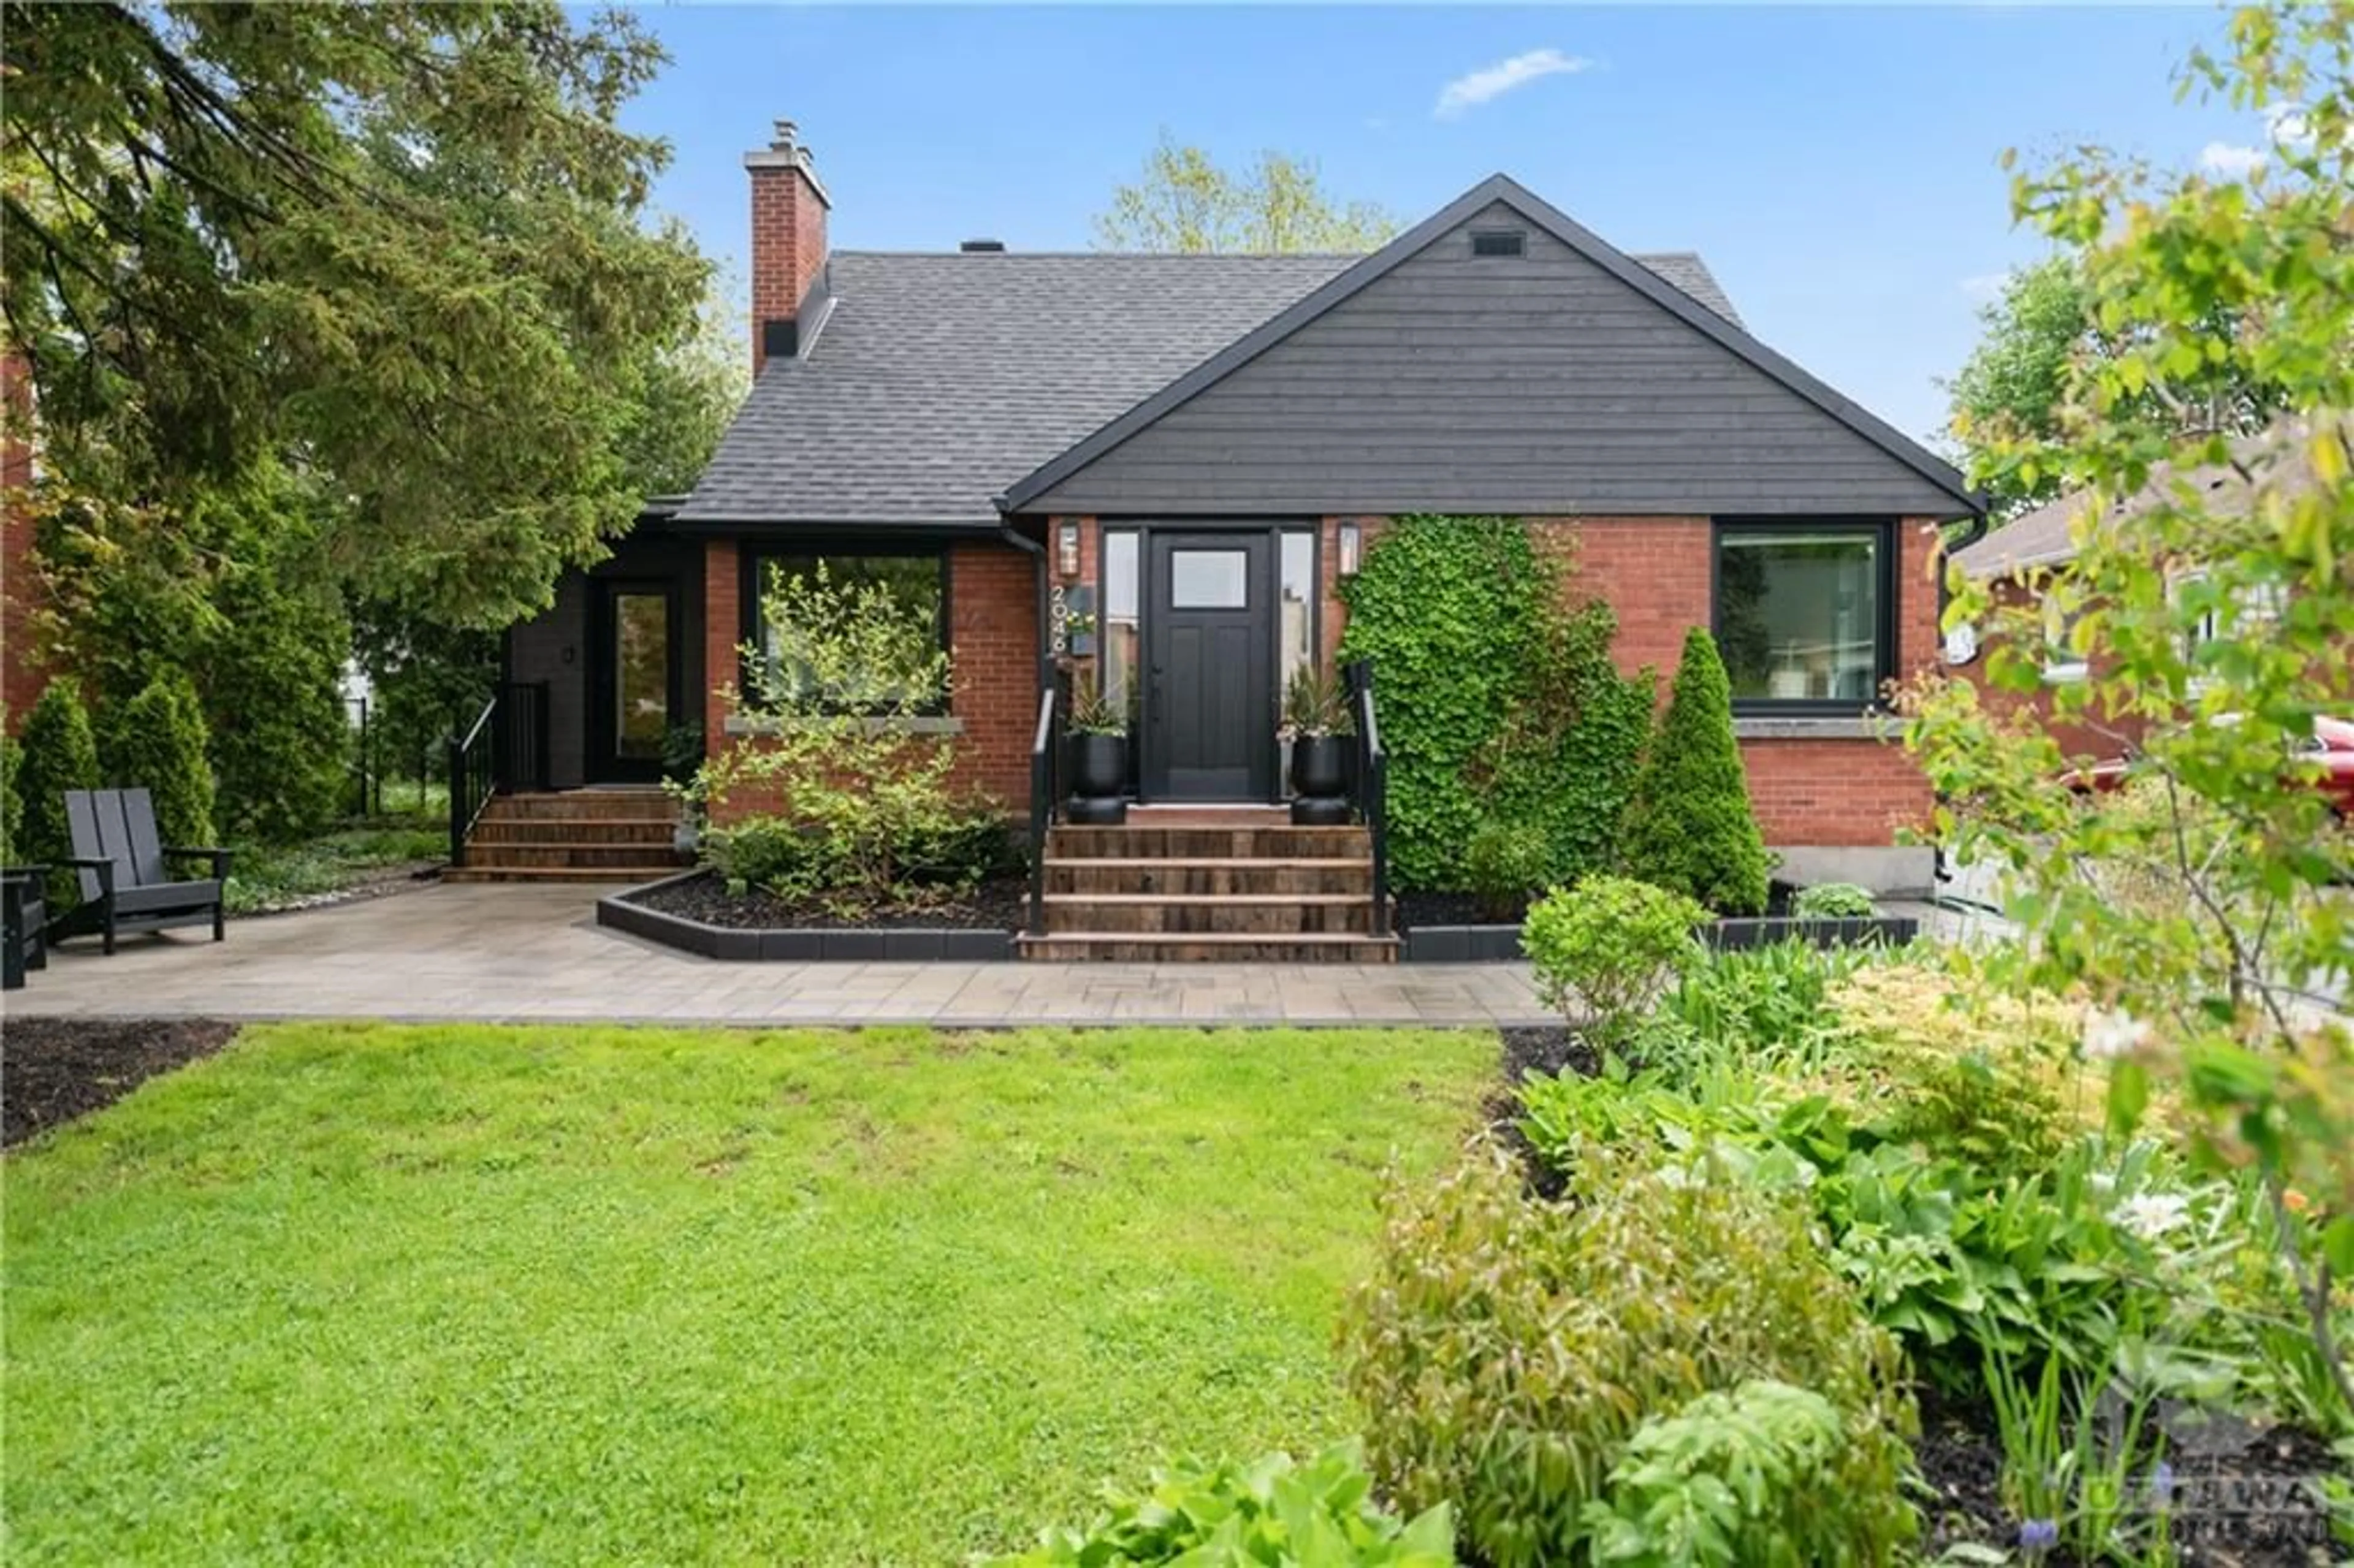 Home with brick exterior material for 2046 HONEYWELL Ave, Ottawa Ontario K2A 0P8